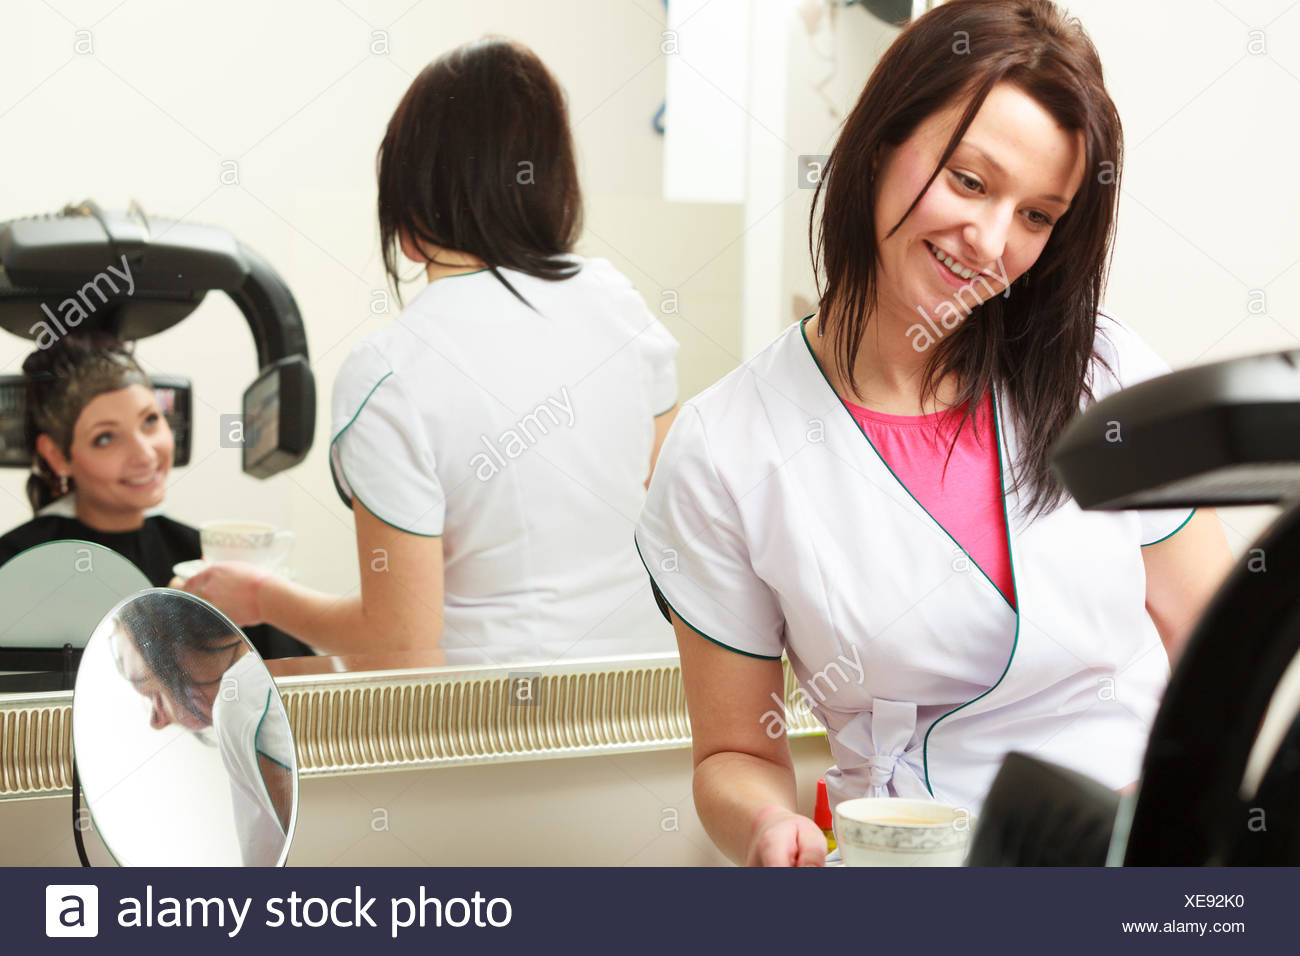 Hairdresser Giving Cup Of Hot Beverage Drink Coffee Or Tea Woman